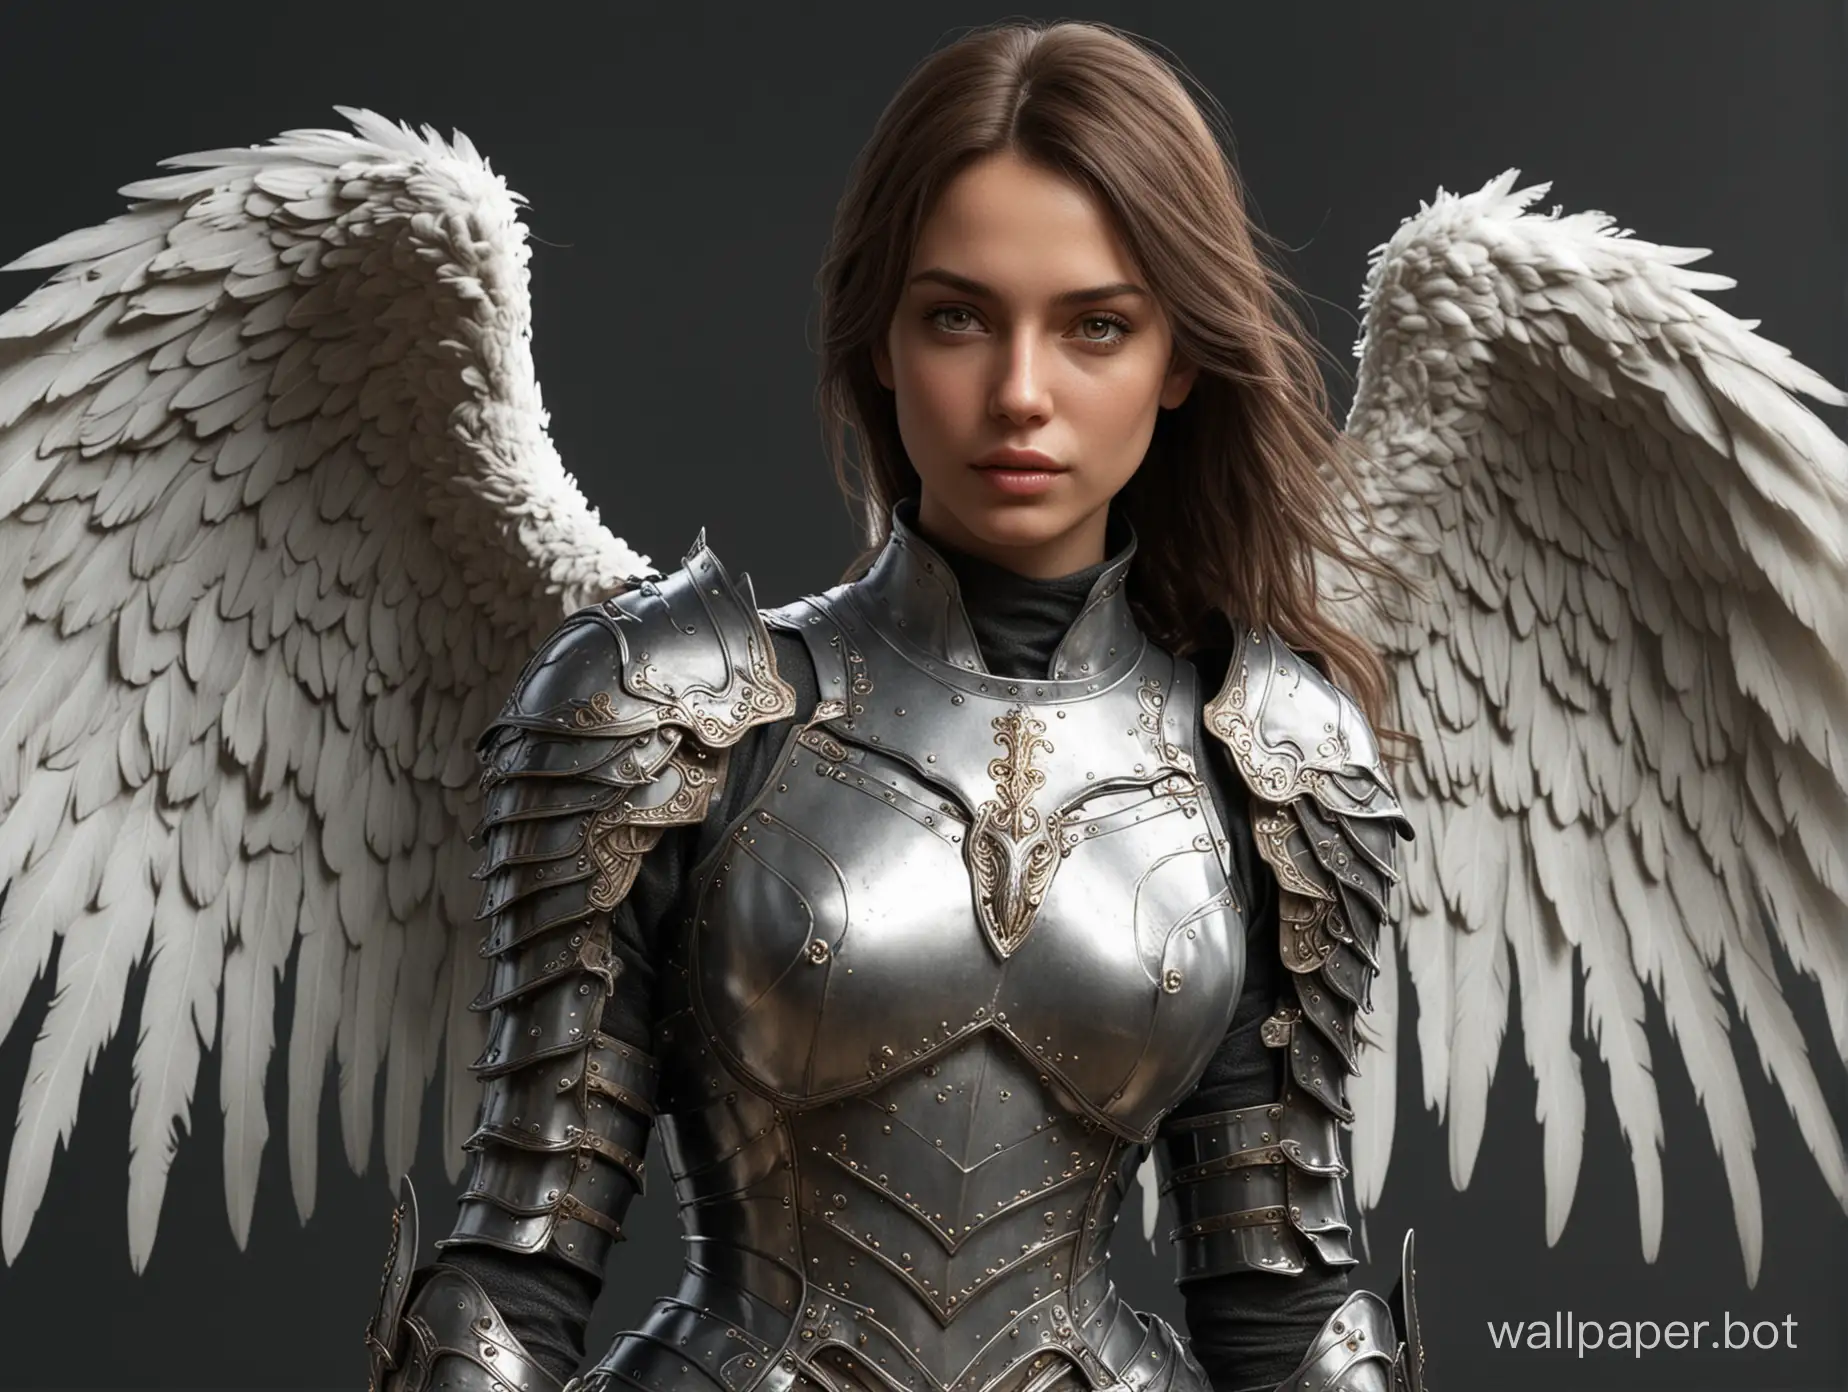 Realistic-Armored-Knight-with-Angel-Wings-Woman-Stunning-Fantasy-Artwork